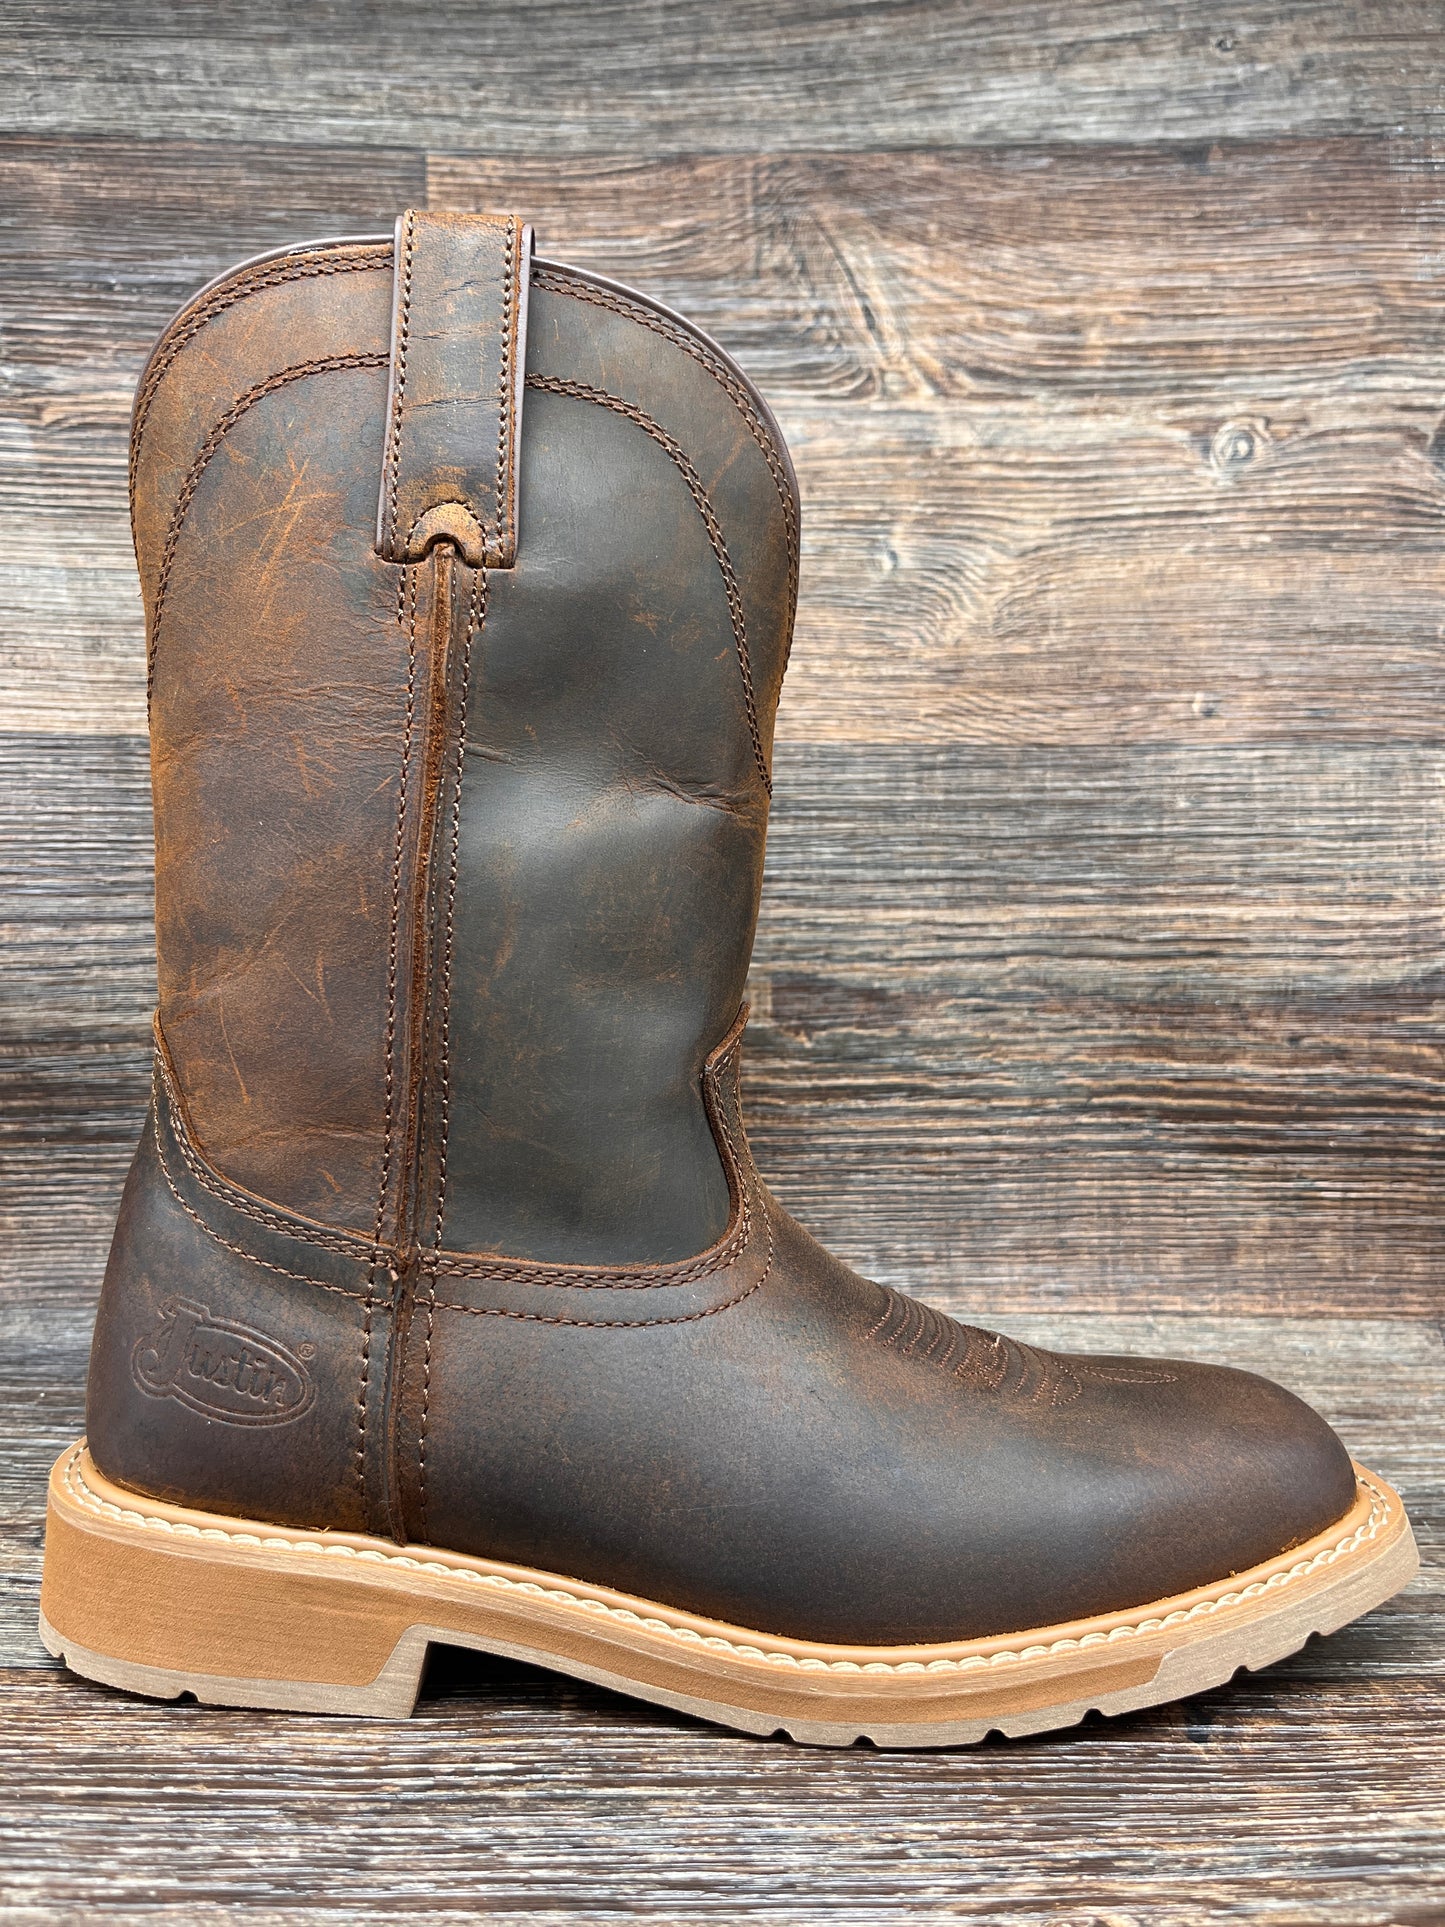 se3100 Men's Buster Soft Toe Square Toe Work Boot by Justin